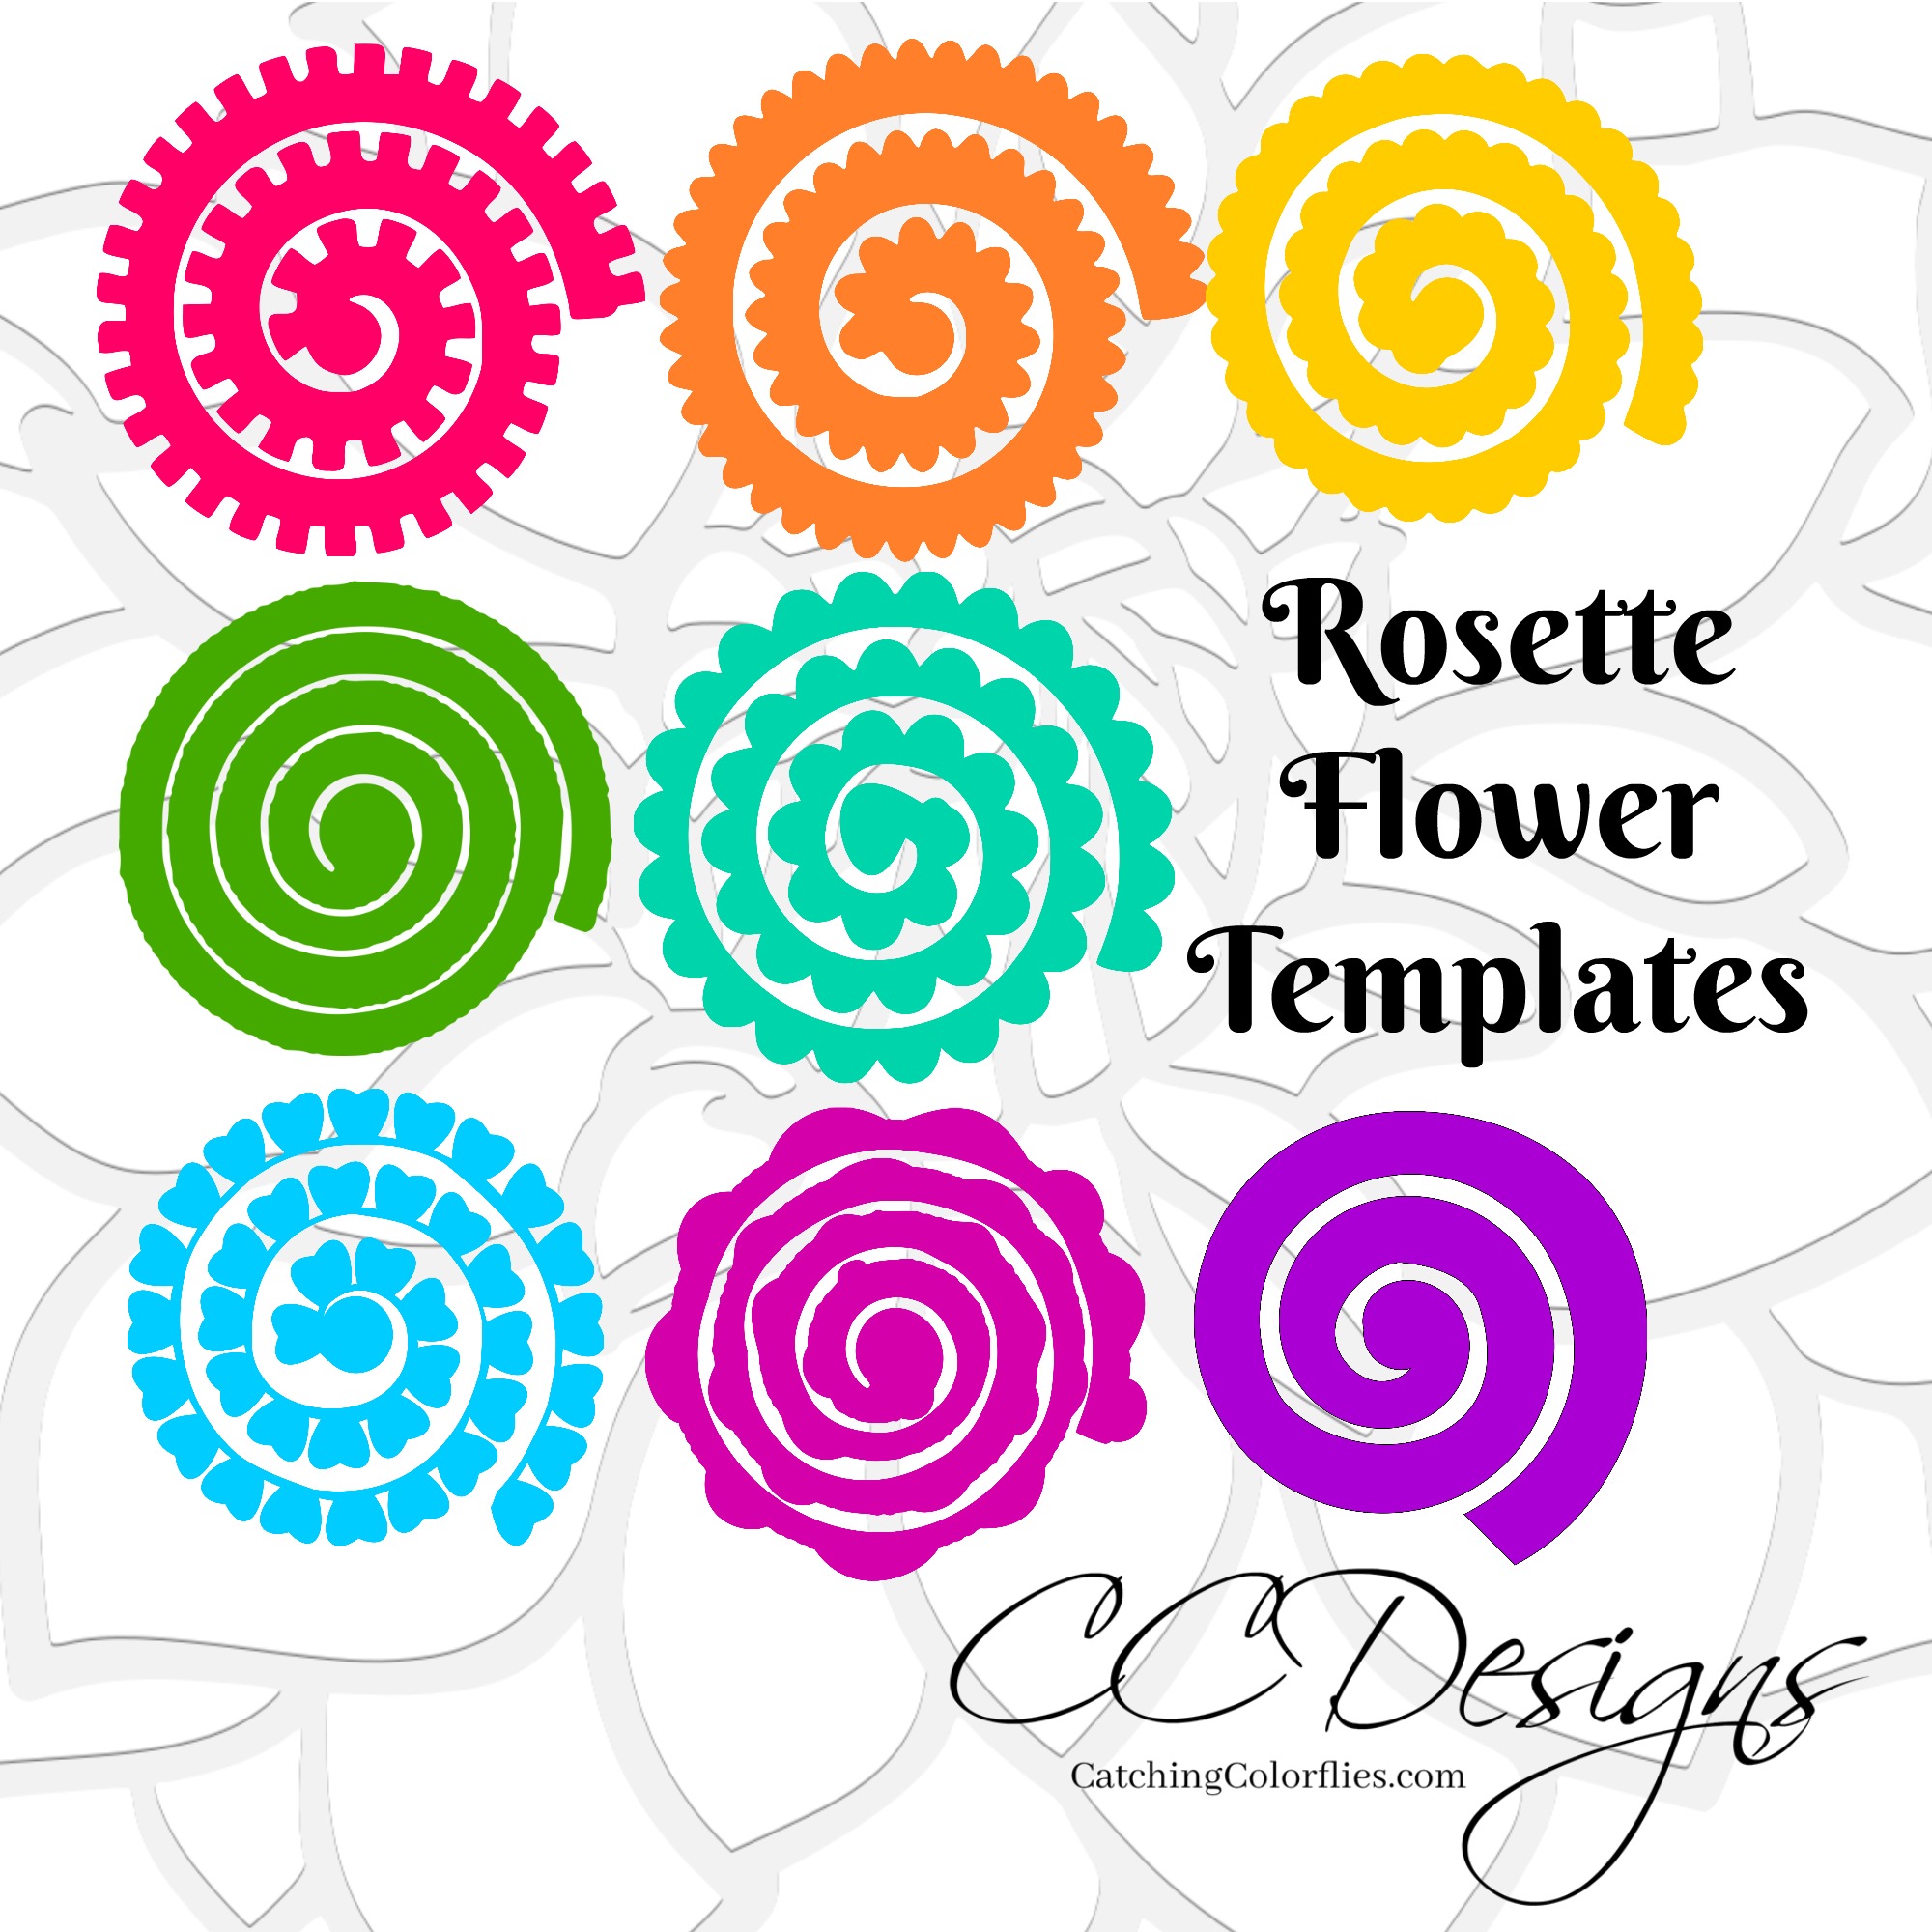 Paper flower templates with full tutorials. Printable PDF & SVG Cut Files